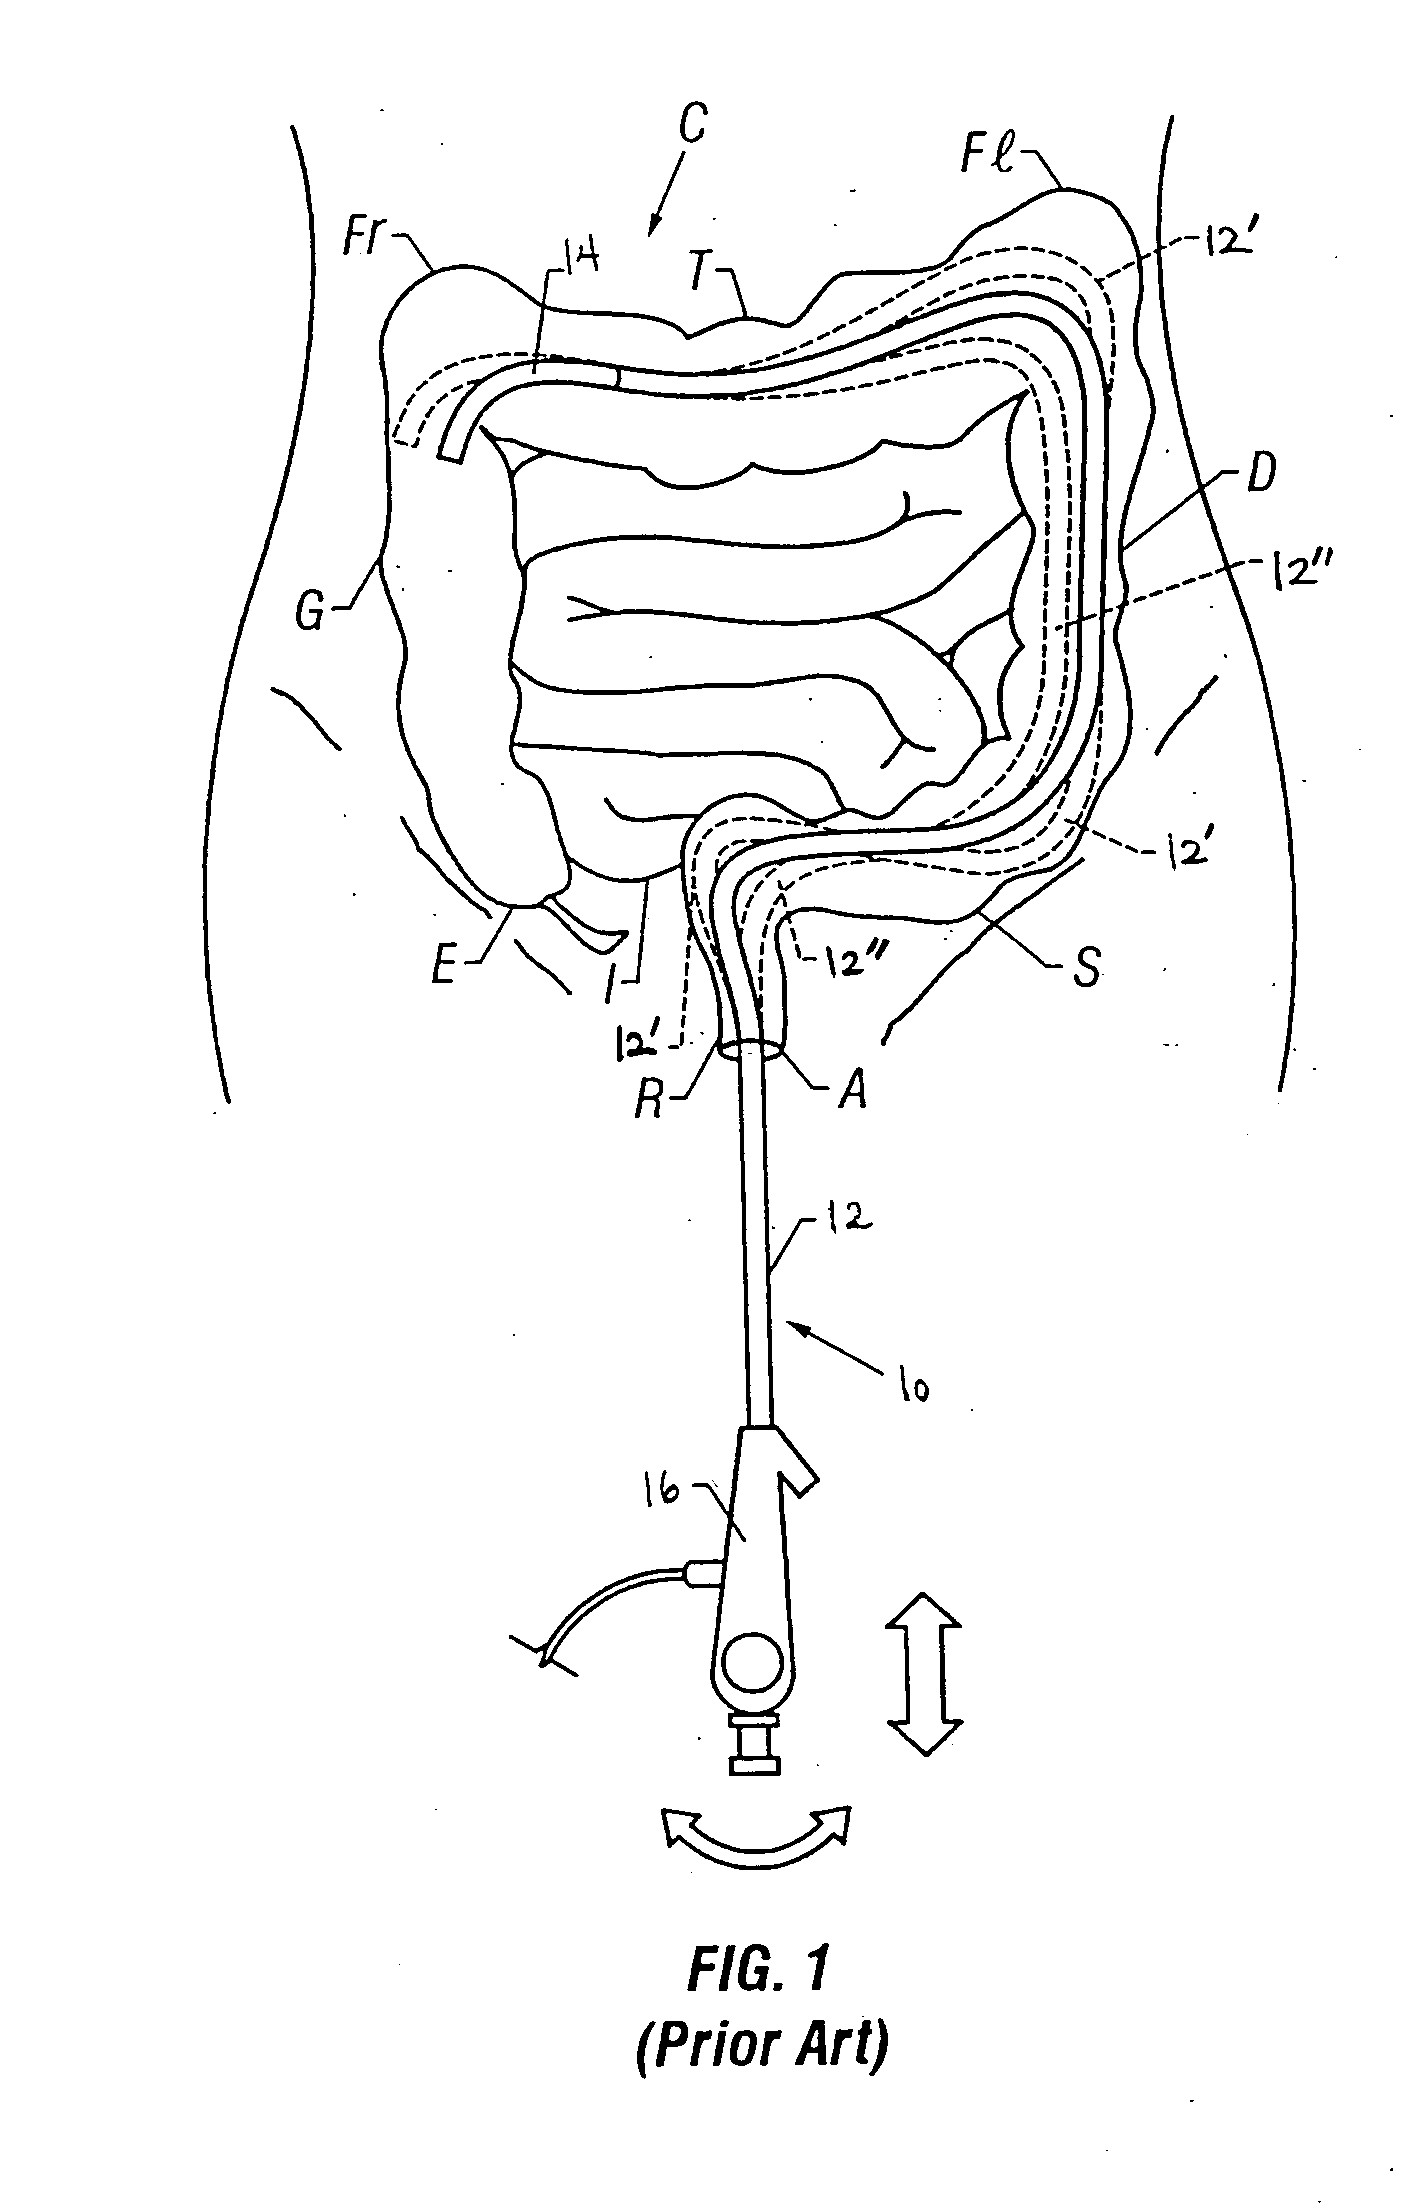 Method and apparatus having an elongate guide and controllable portion